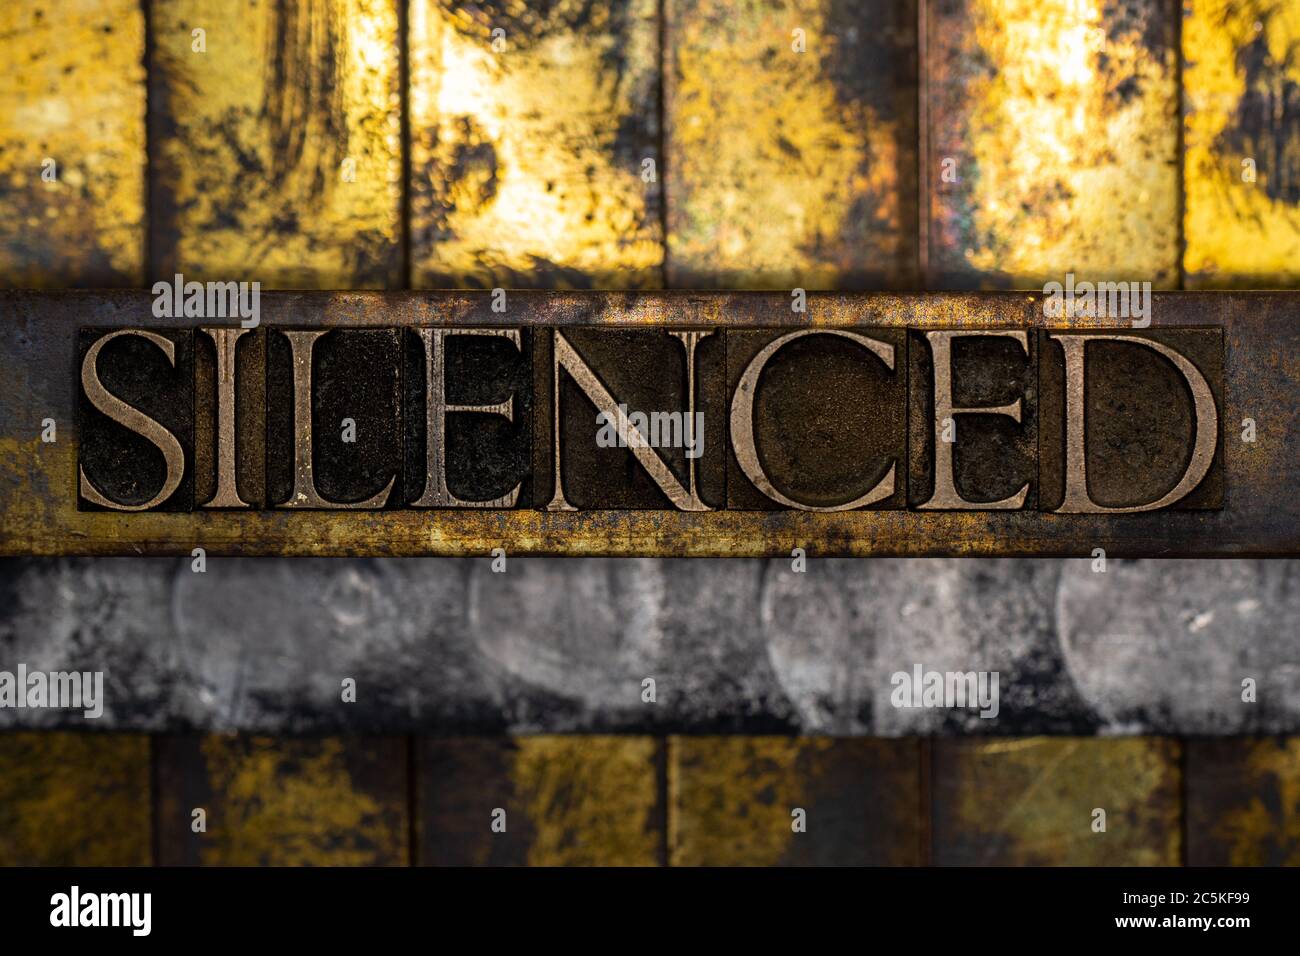 Silenced text formed with real authentic typeset letters on vintage textured silver grunge copper and gold background Stock Photo